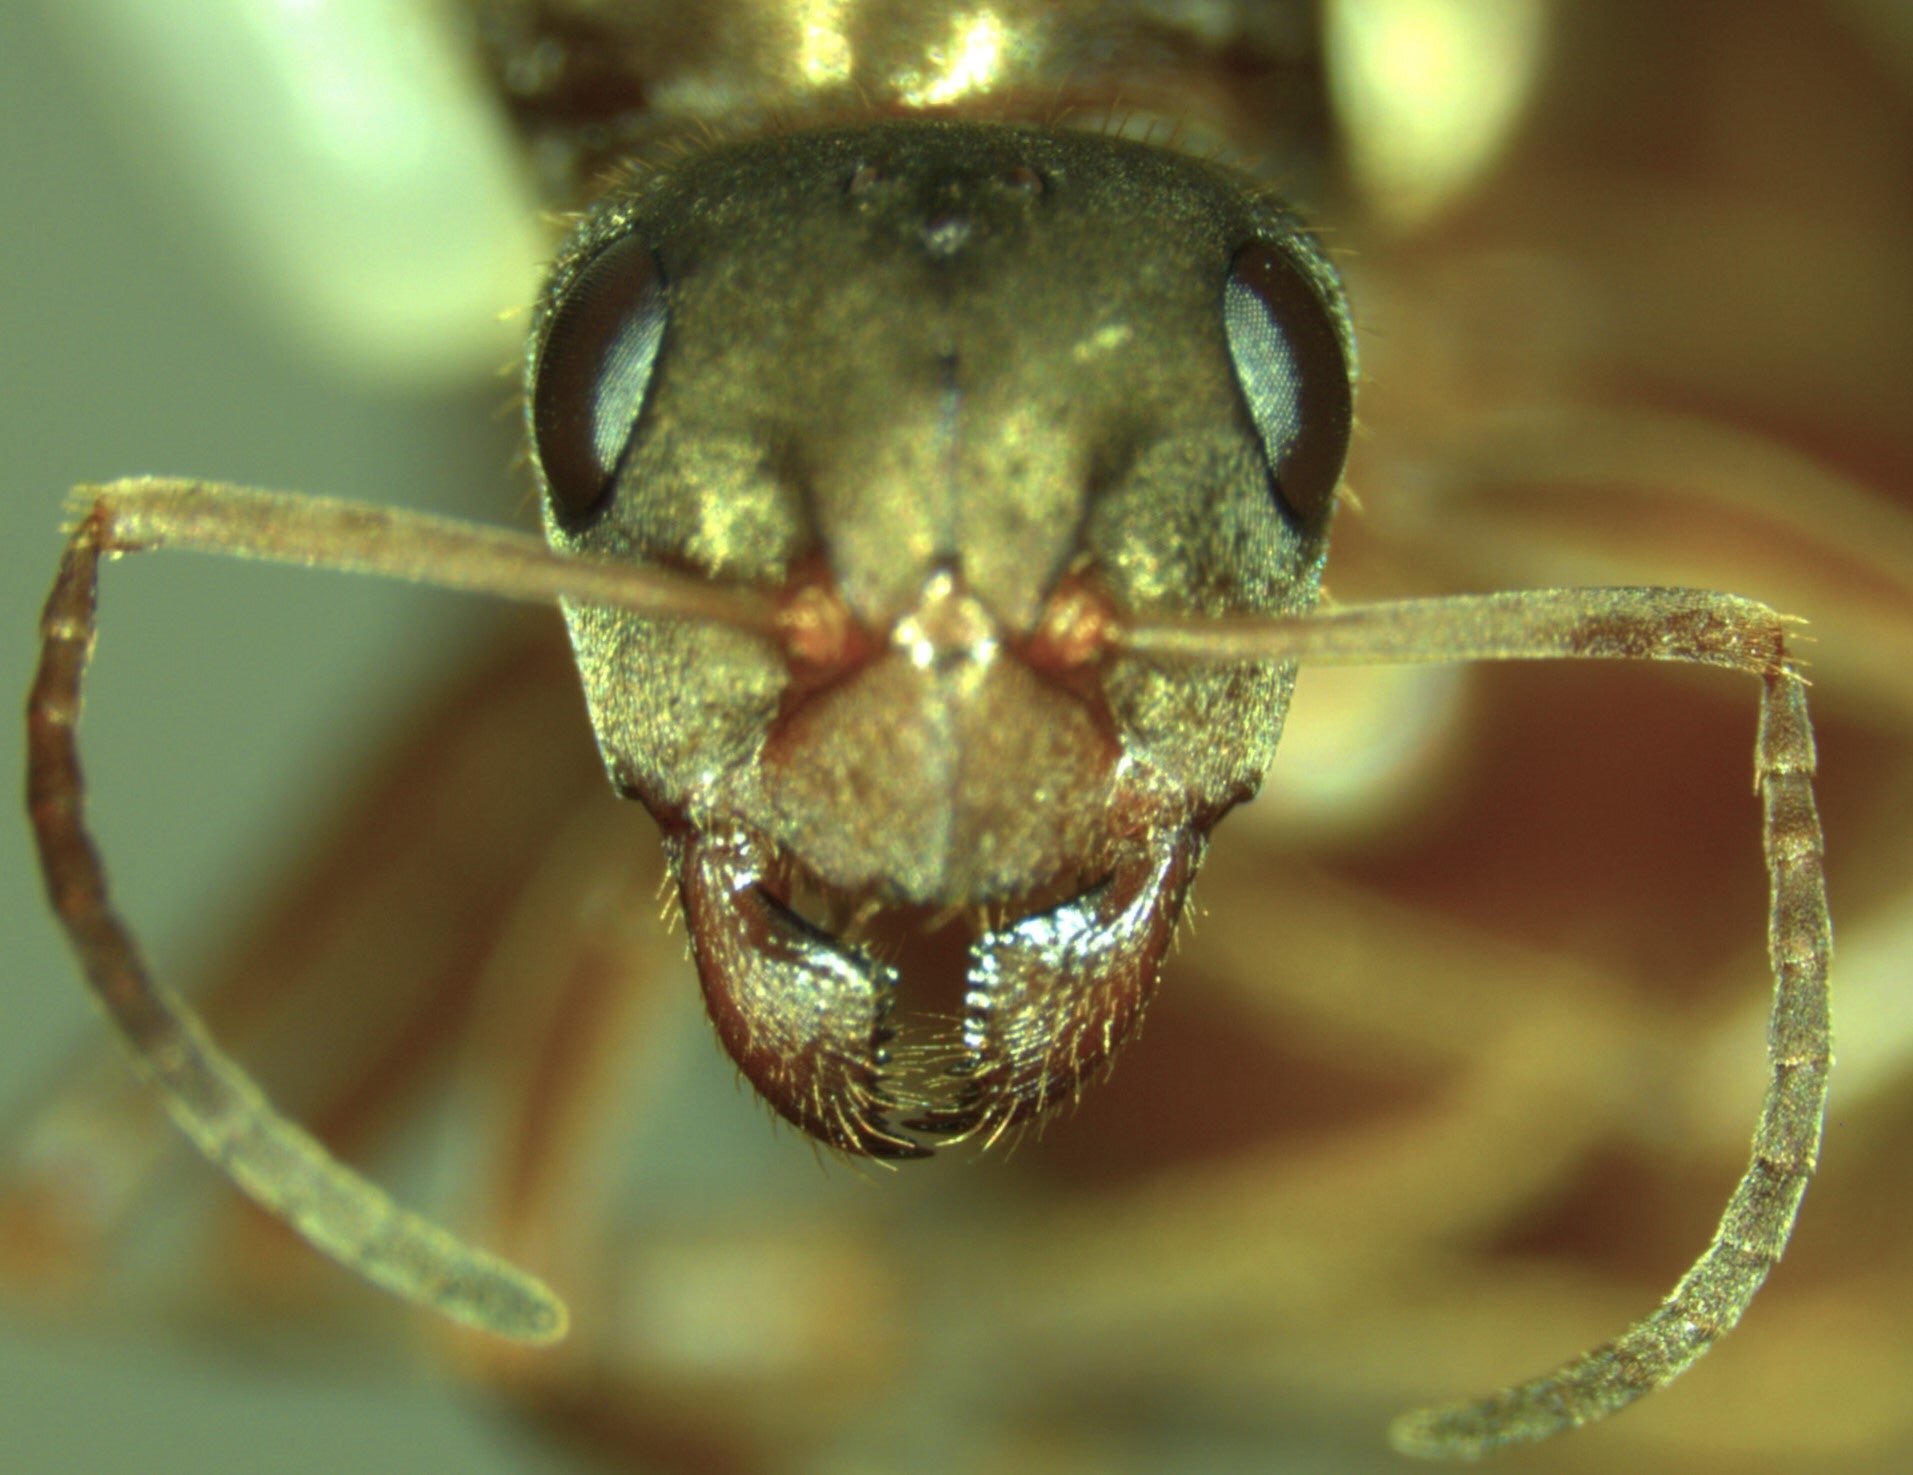 Supergene research solves the mystery of tiny ant queens